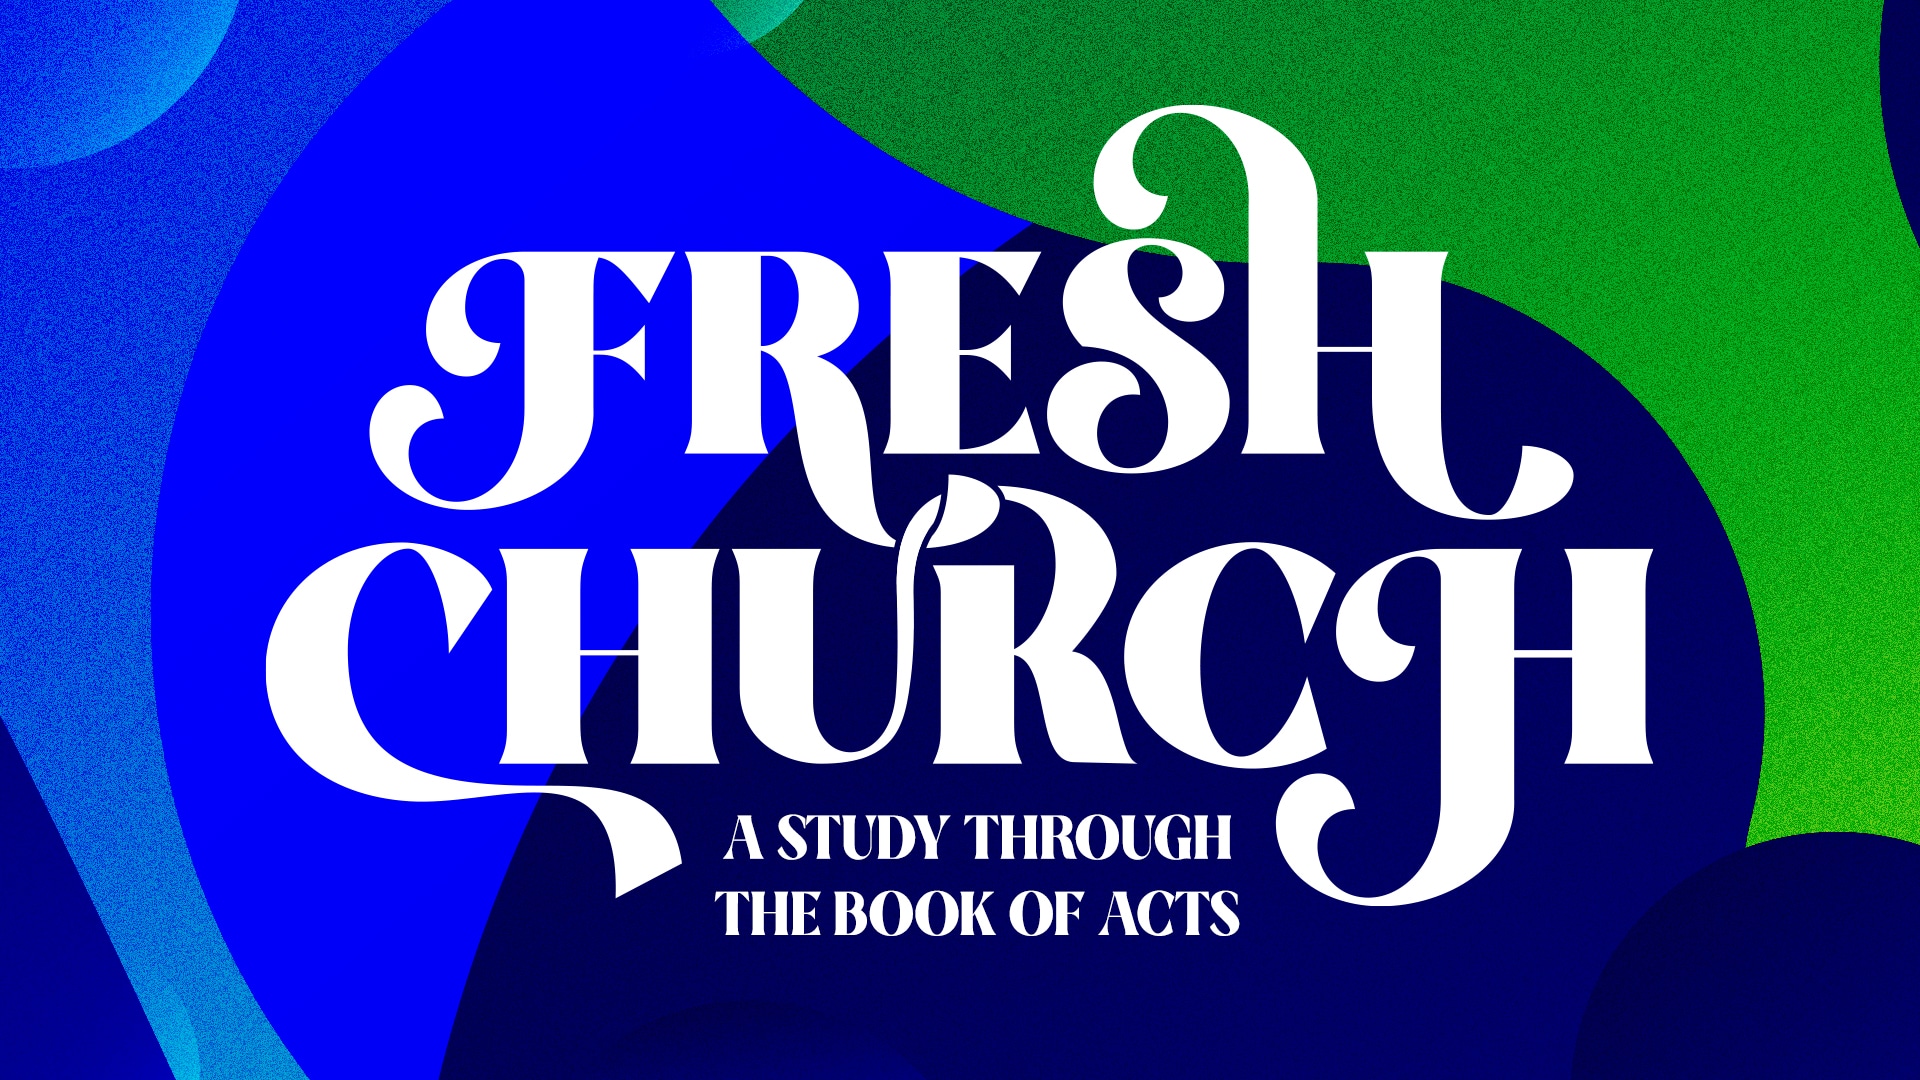 Acts 6: Ministry Roles in the Church (Fresh Church) Image